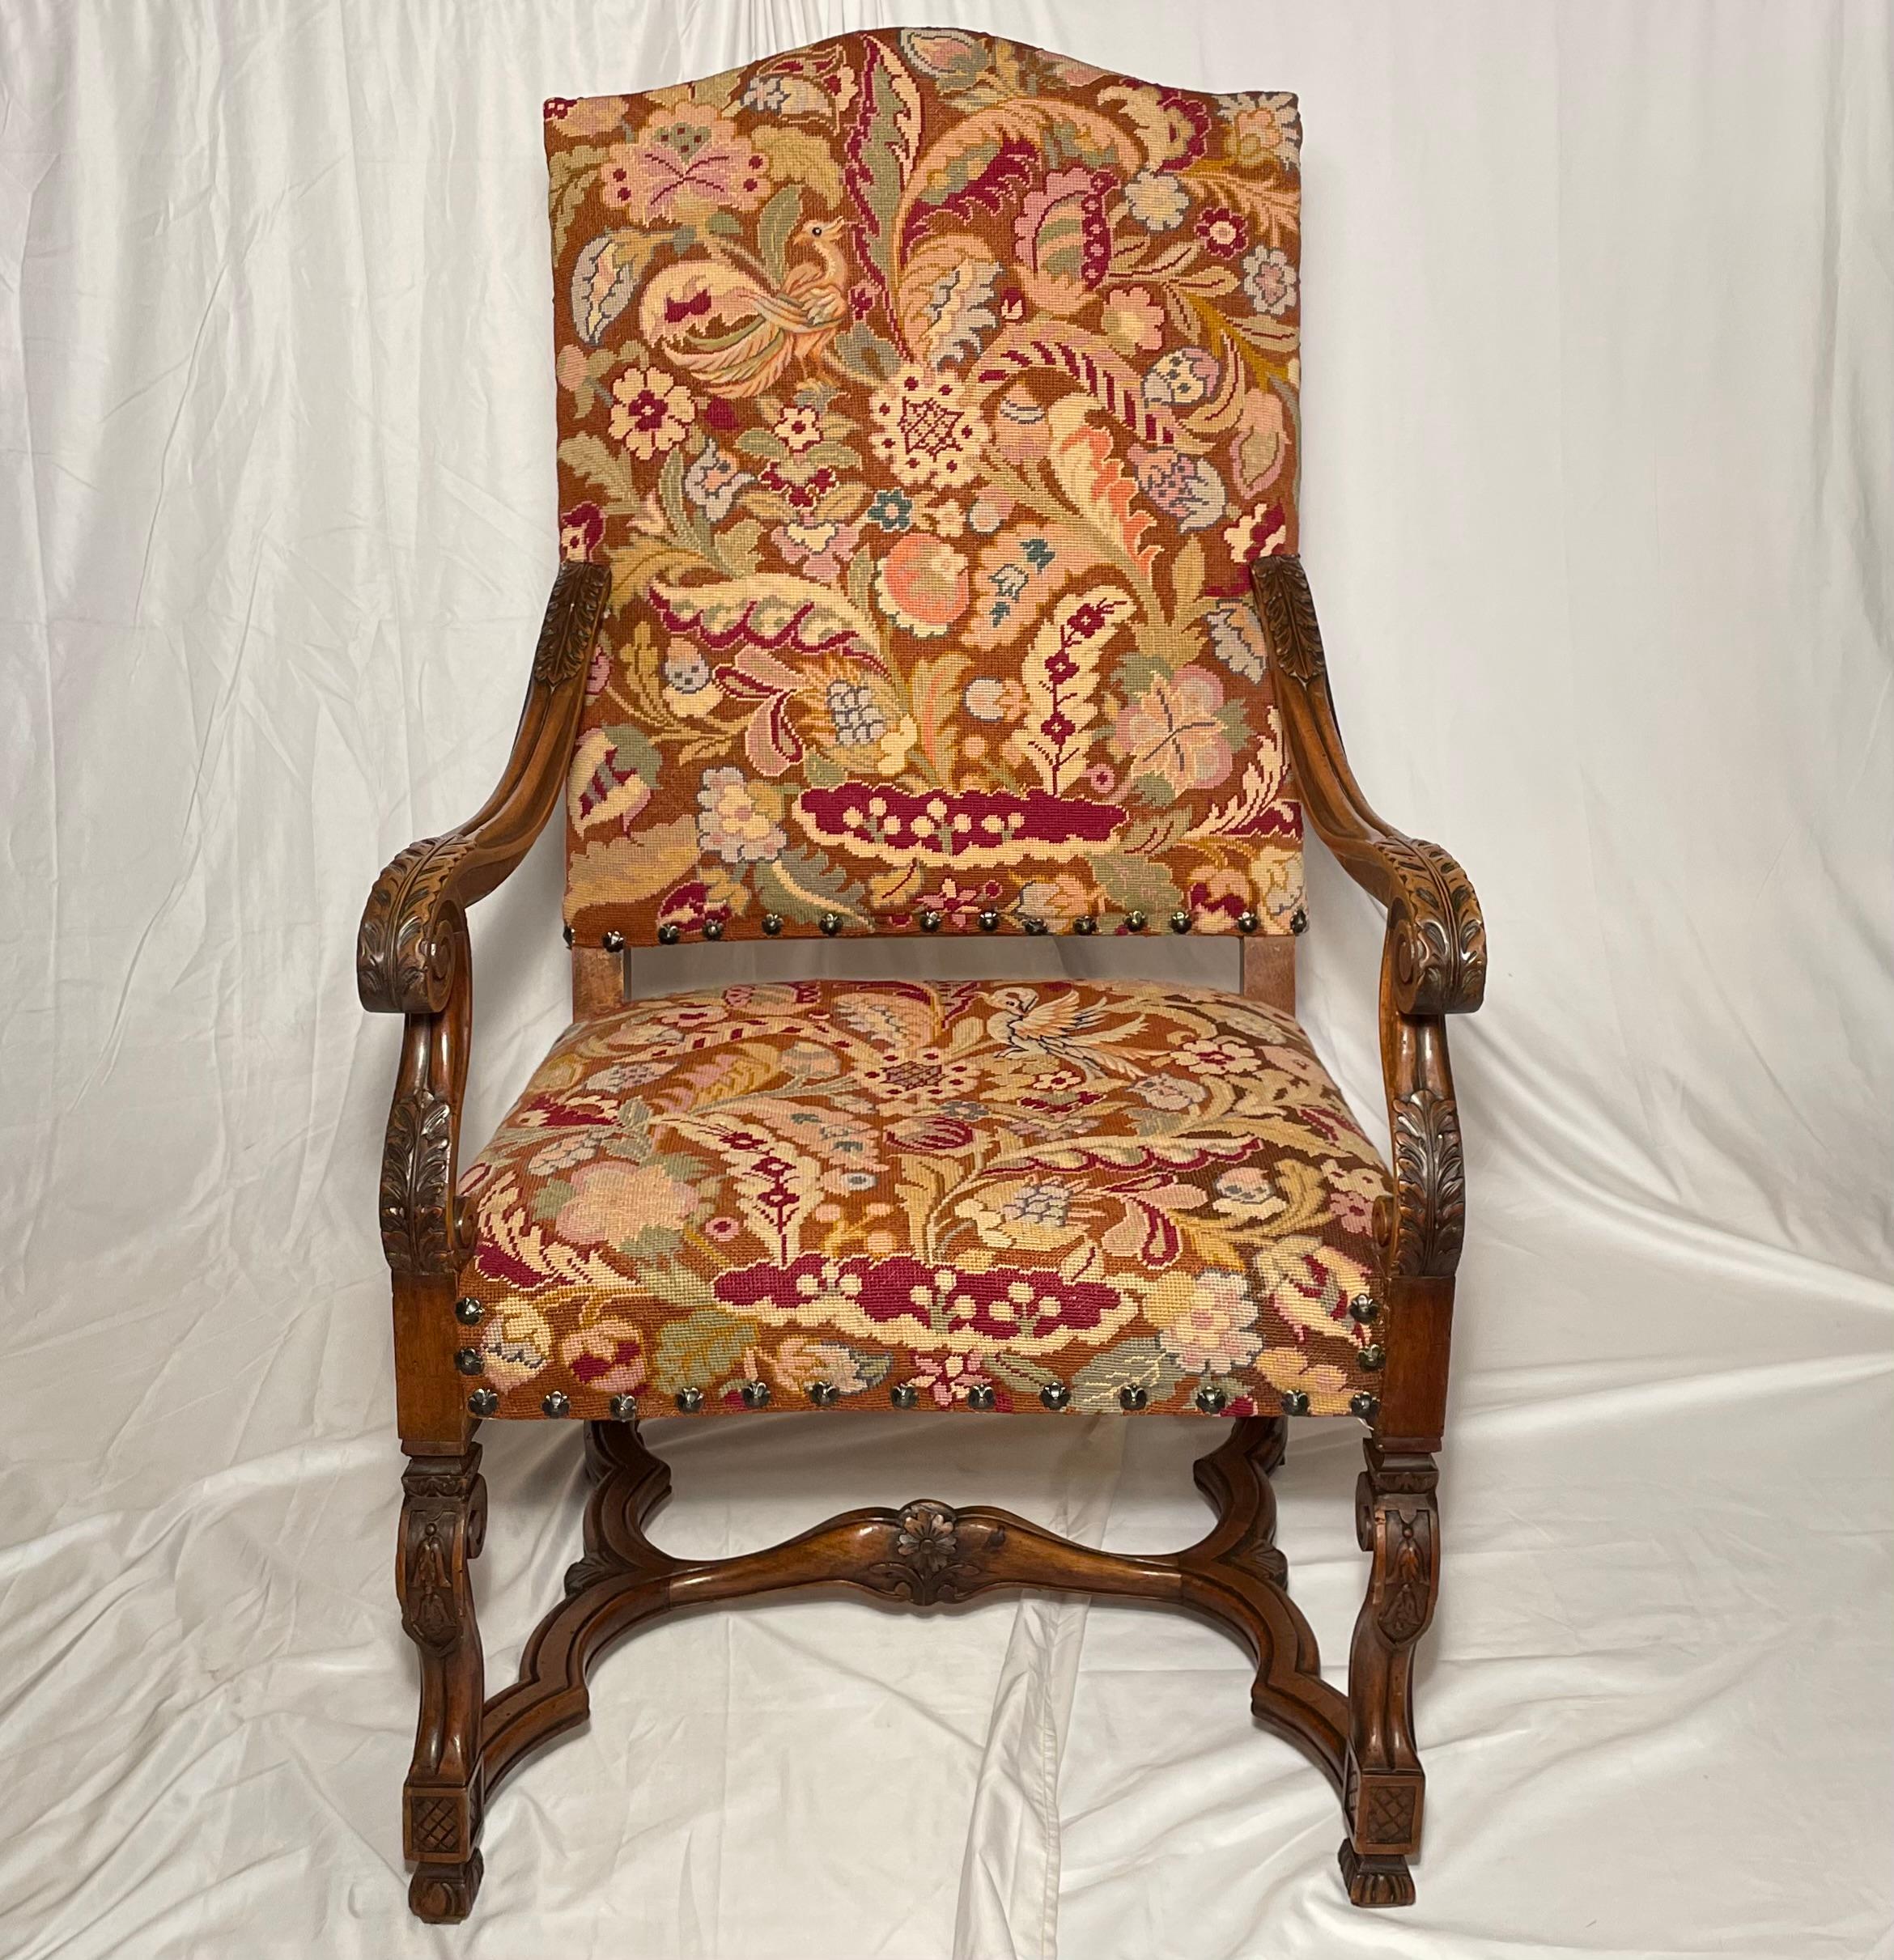 Pair of Antique French Walnut Armchairs, circa 1880. These armchairs are ample and would work well in a variety of settings. 